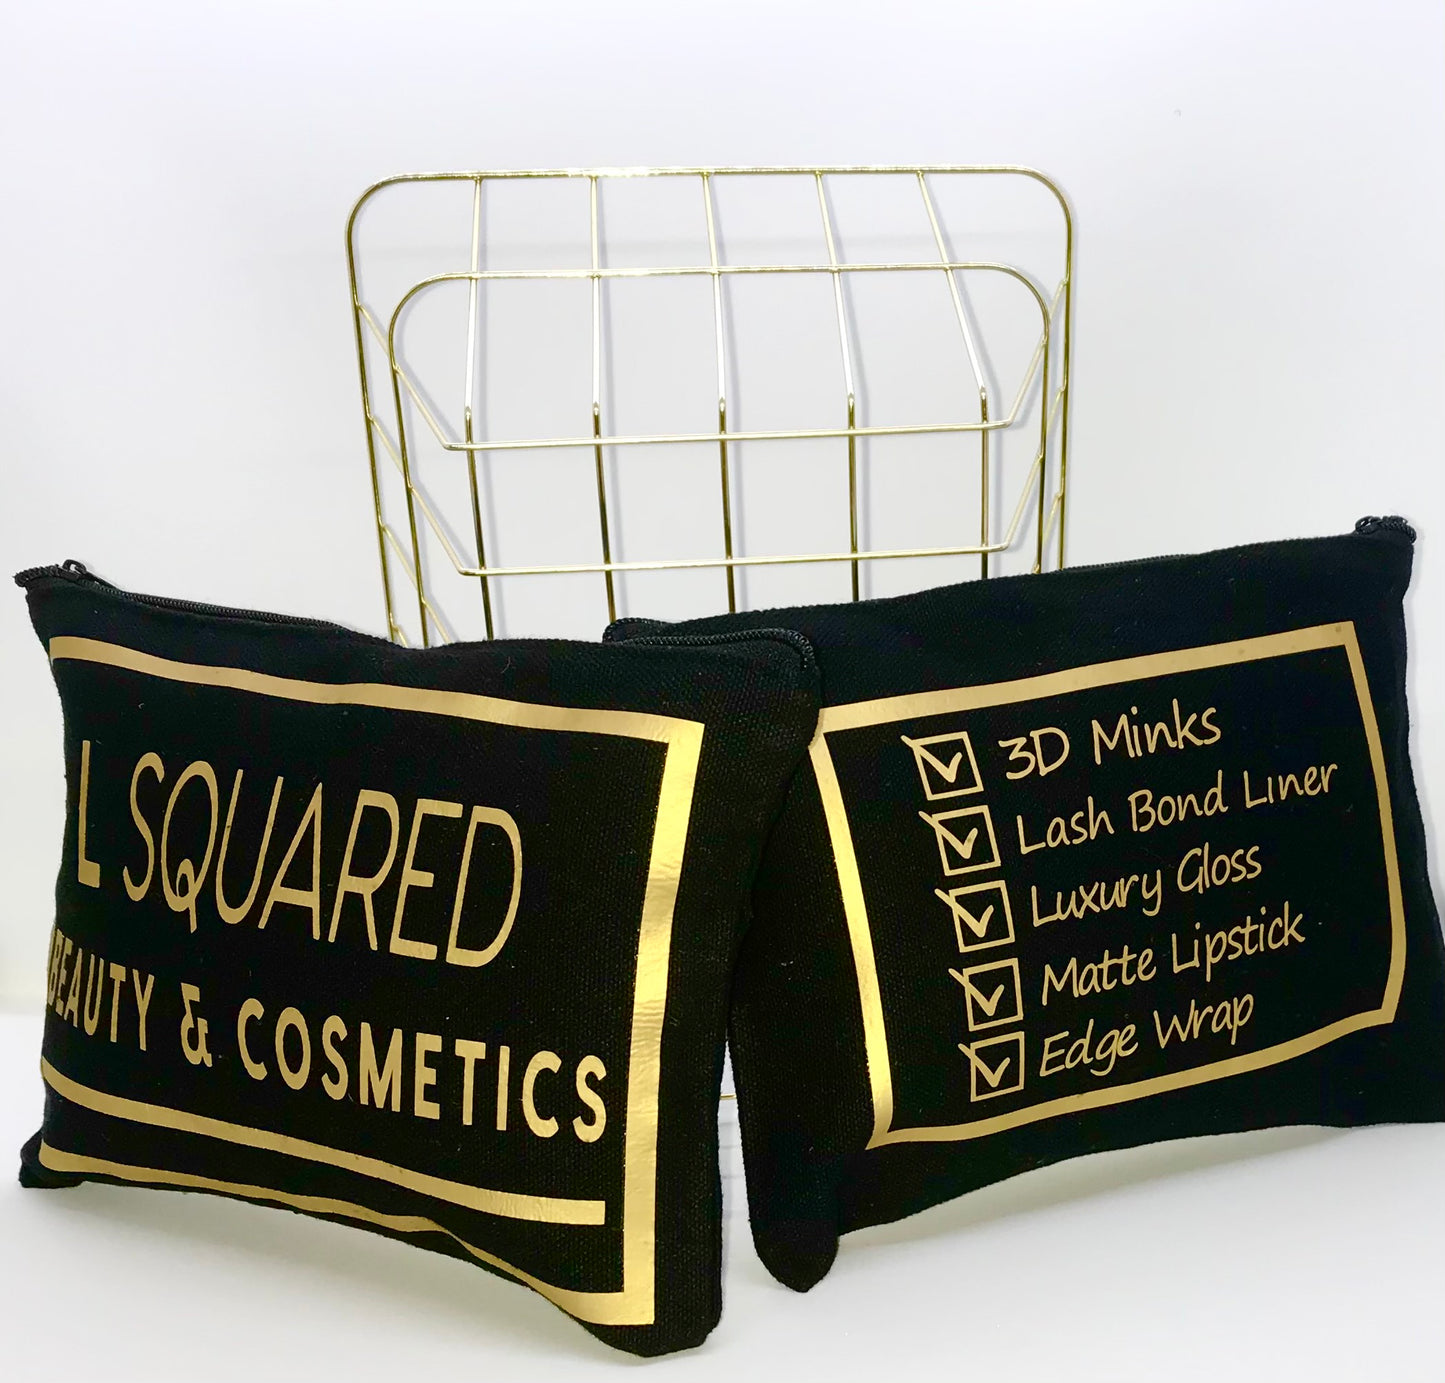 LSquared Beauty Cosmetics Pouch